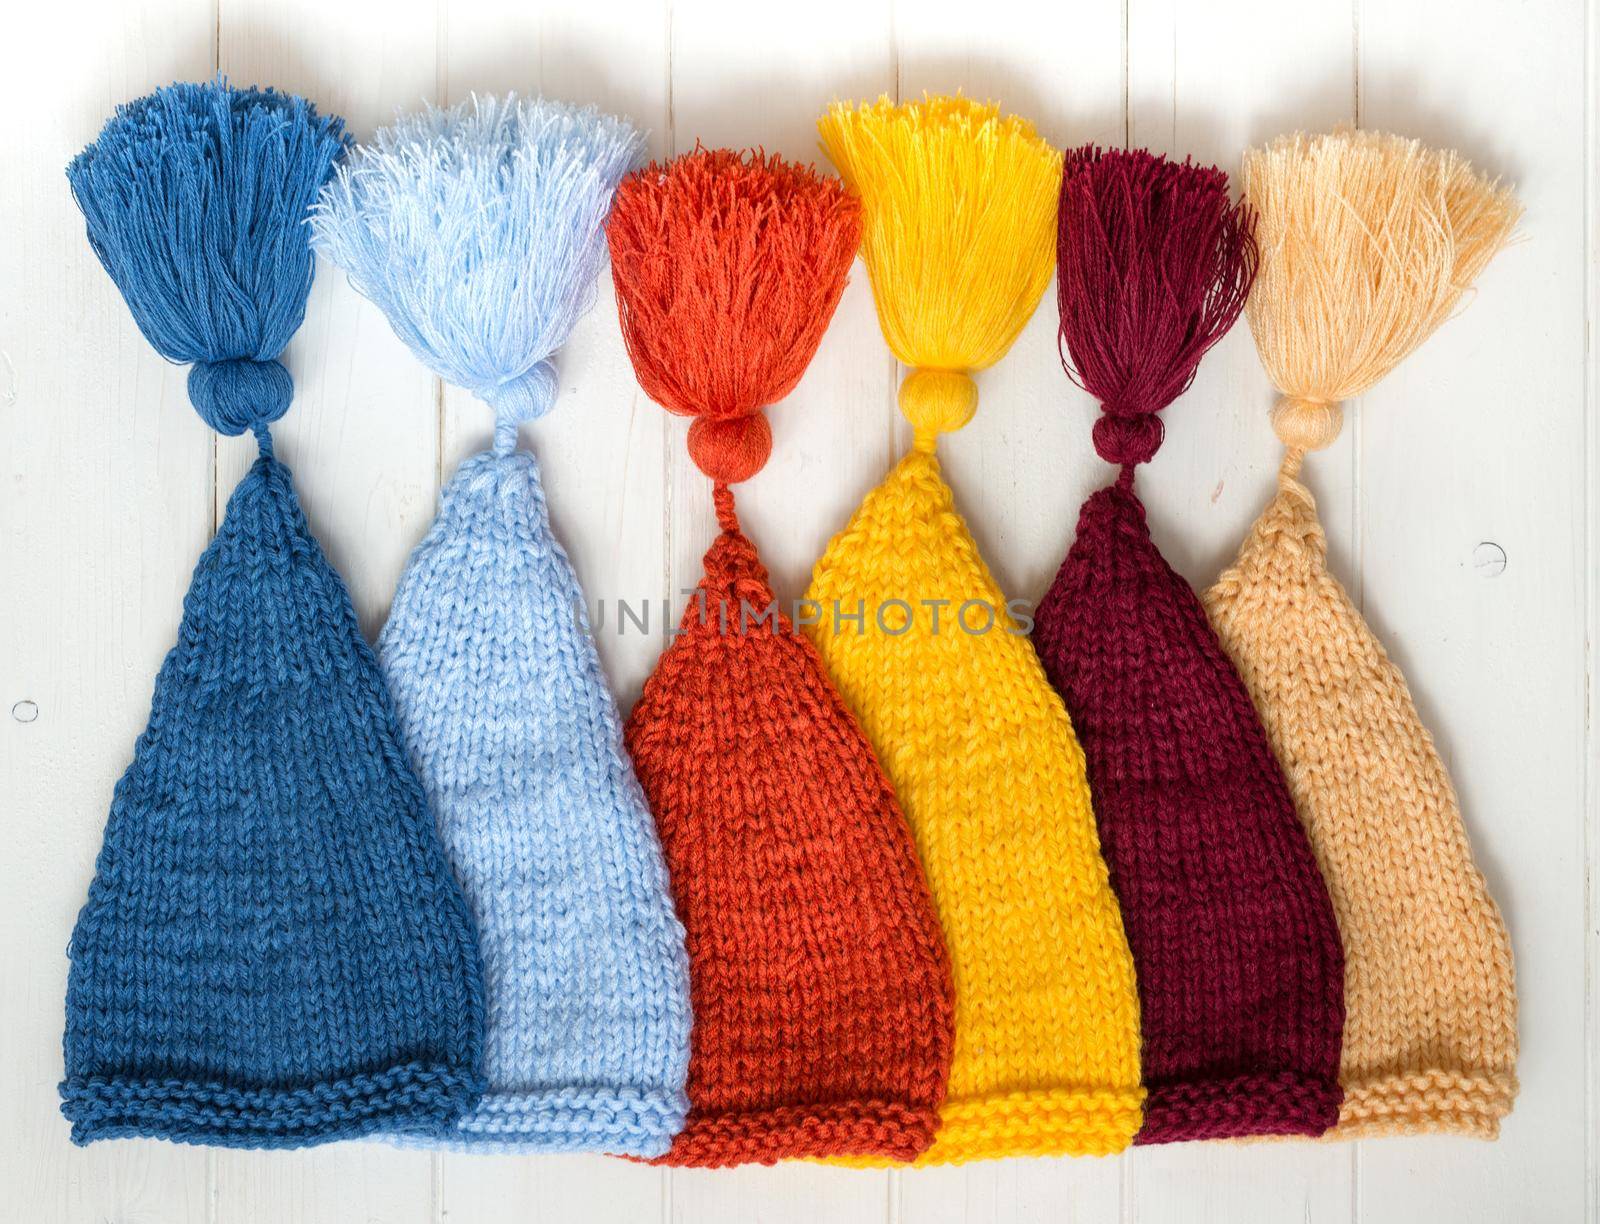 colorful baby knitted hats folded in row on white painted table, top view